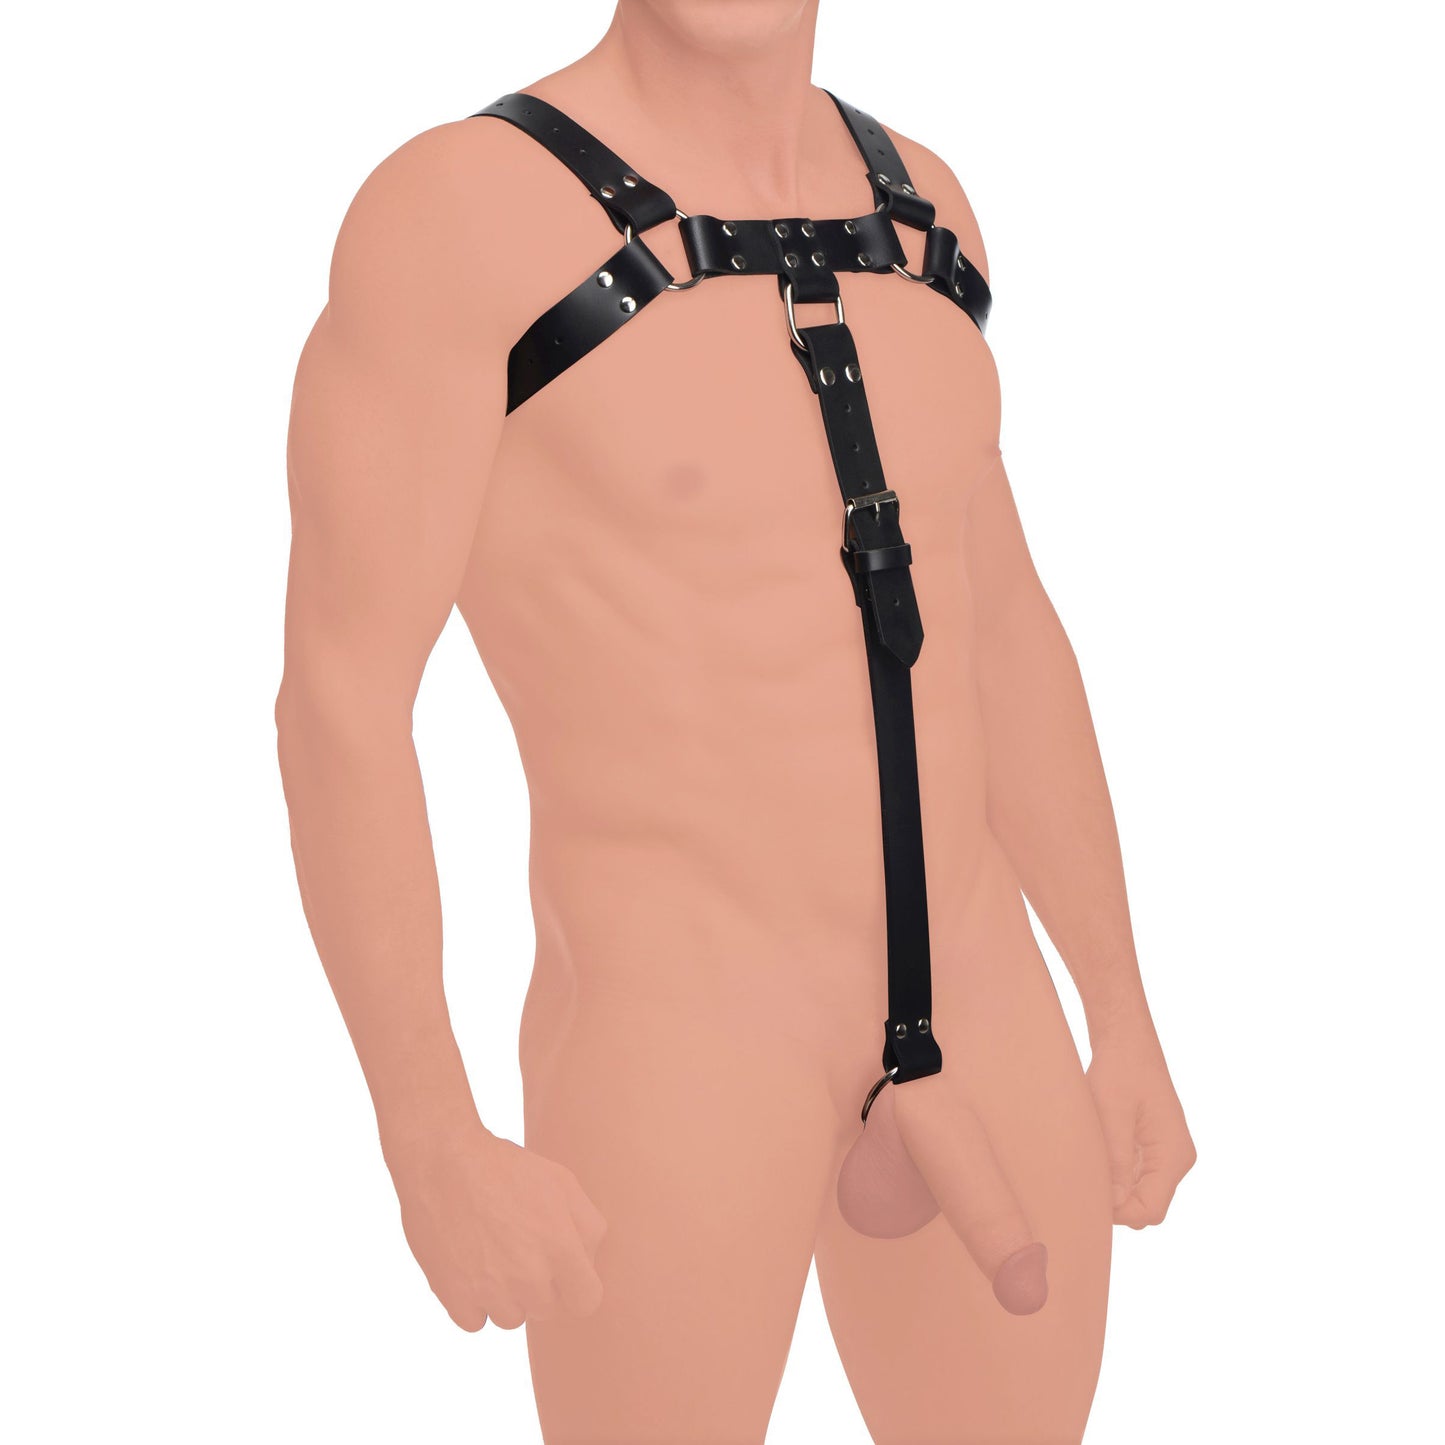 English Bull Dog Harness with Cock Strap - UABDSM